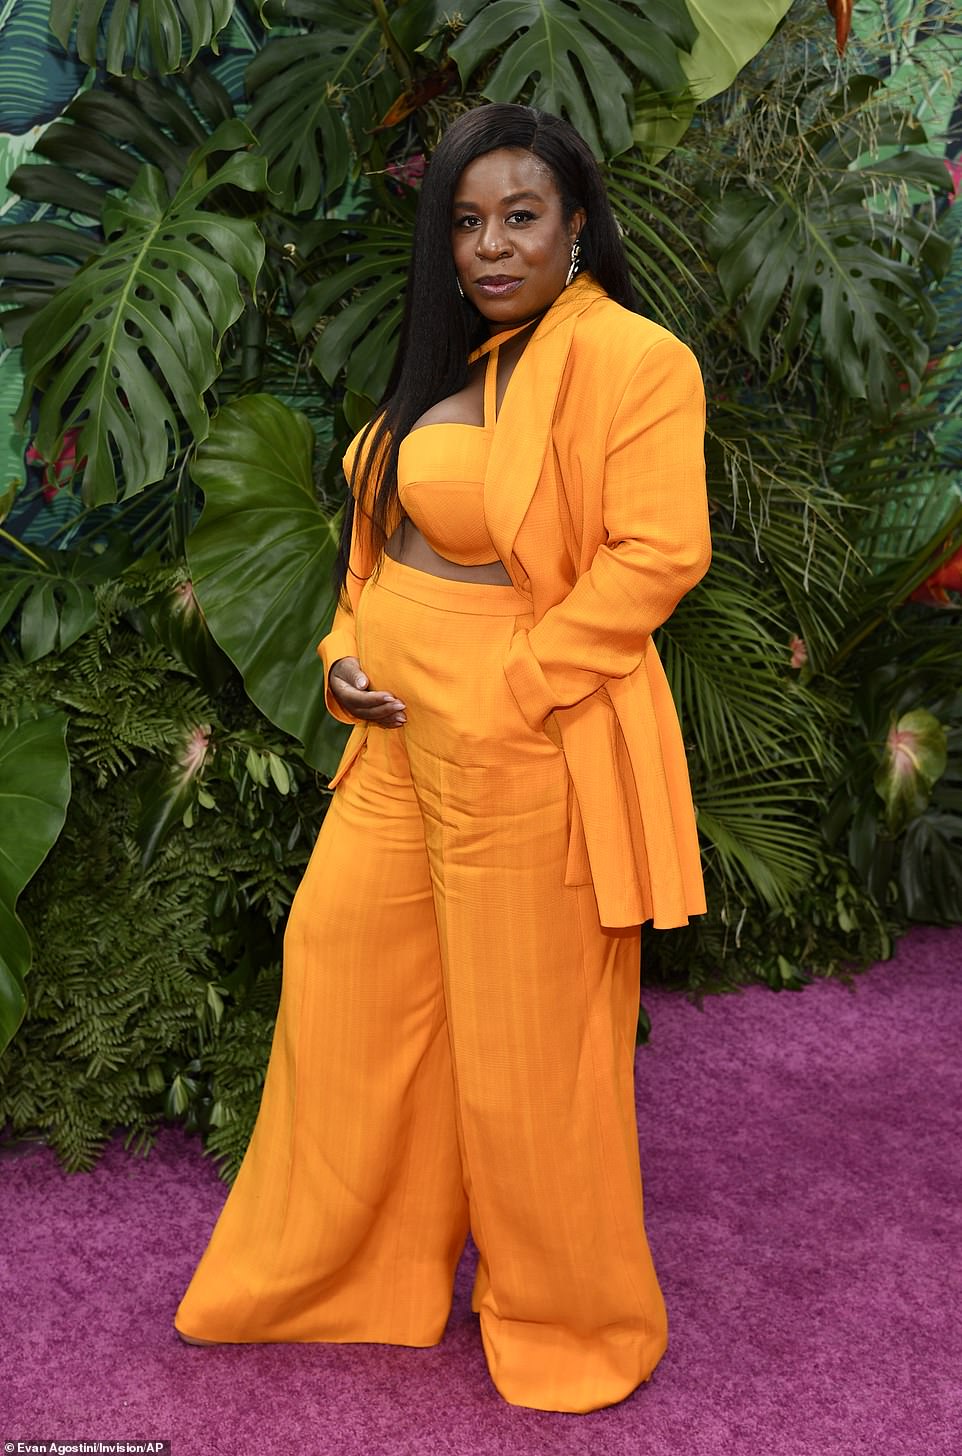 Announcement: Actress Uzo Aduba announced her pregnancy on the red carpet on Sunday while cradling her baby bump